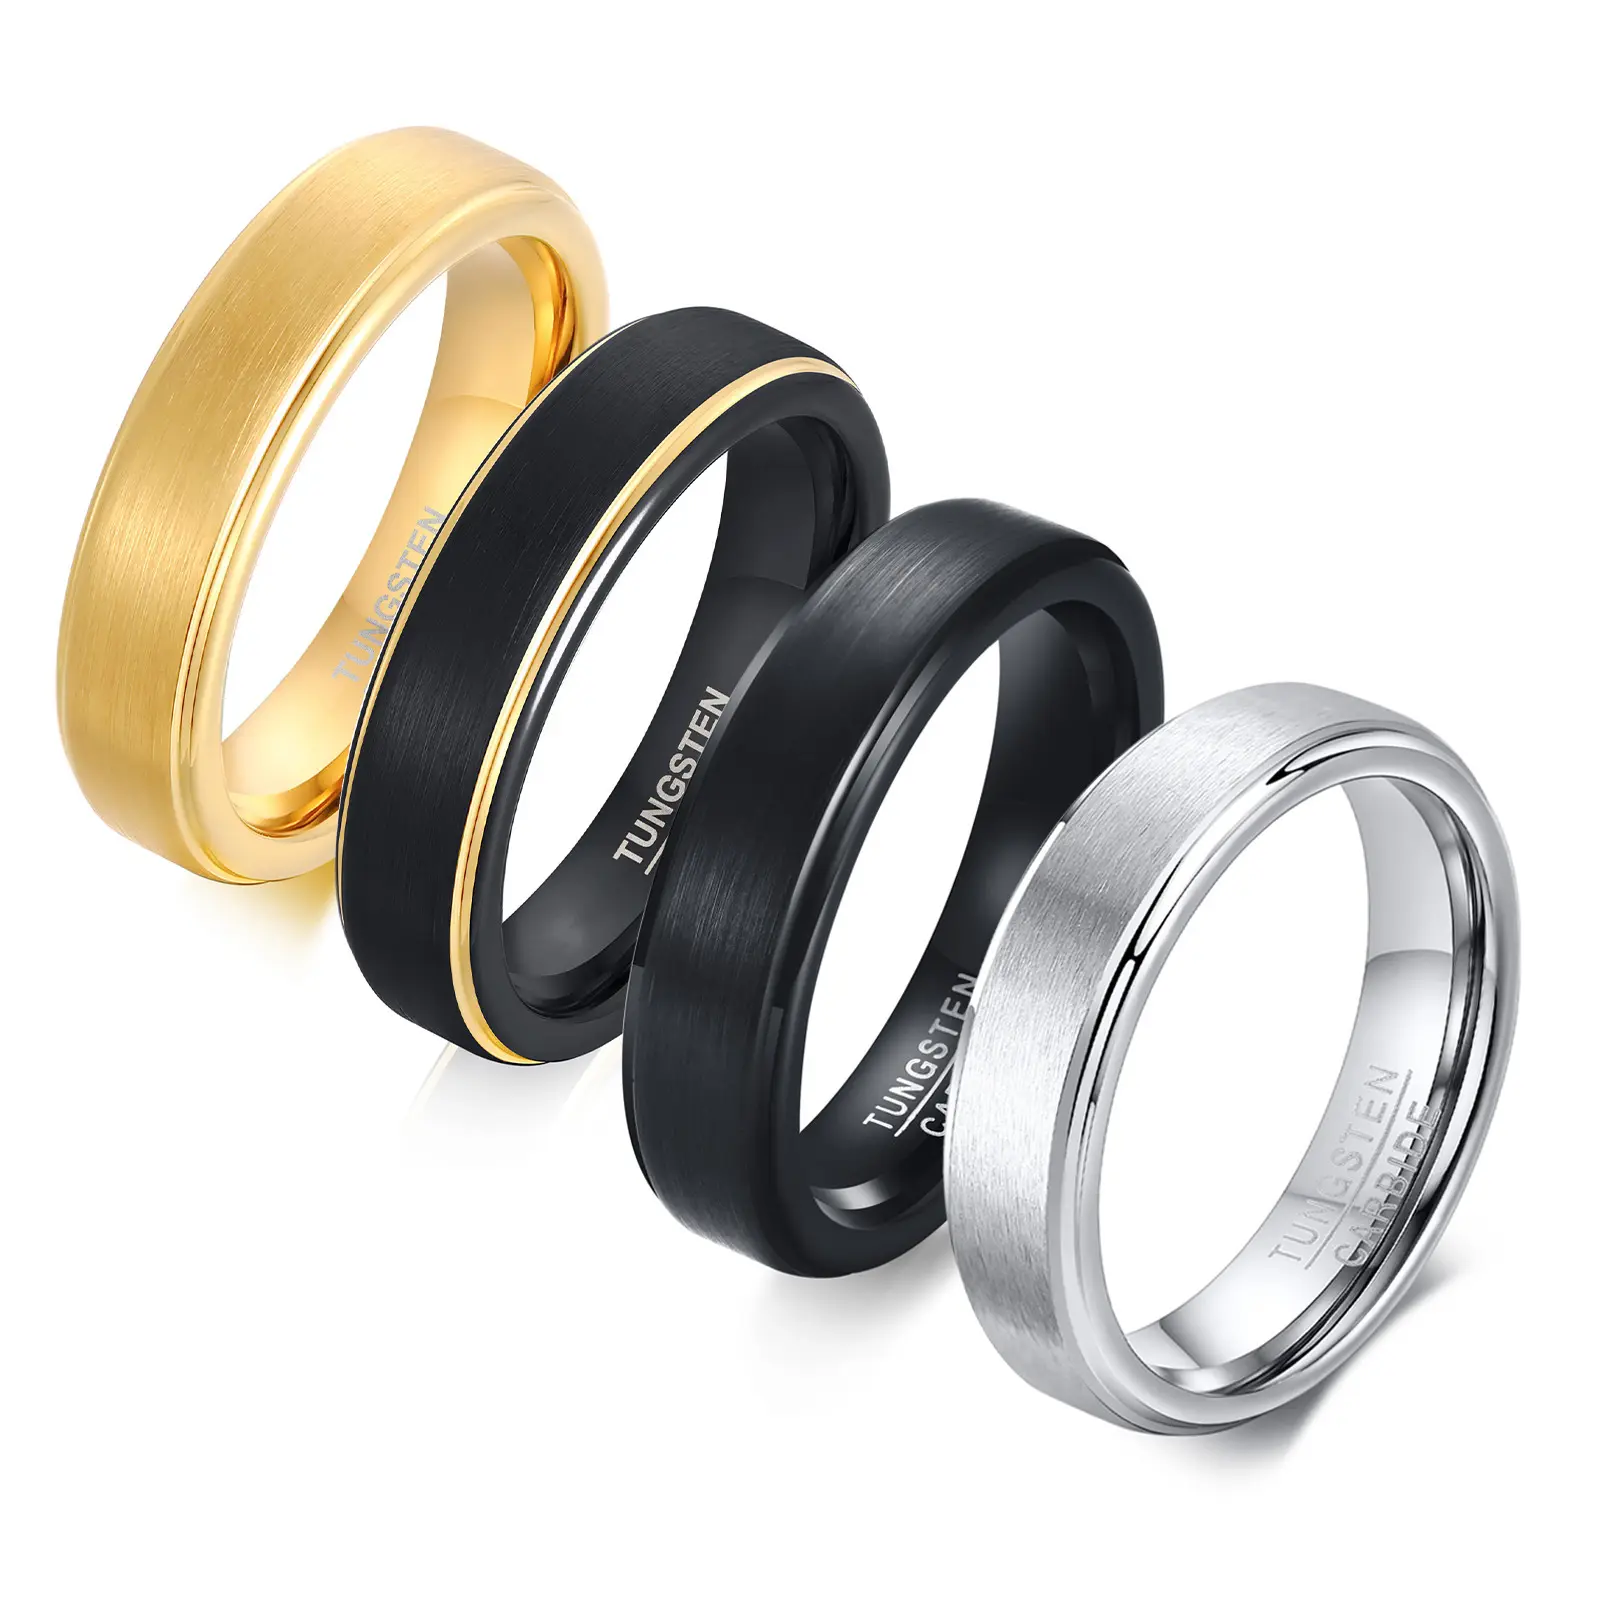 Stock Ring Wholesale Men Women Wedding Band 5mm Brushed Tungsten Carbide Ring Black Silver Gold Rose Gold Color